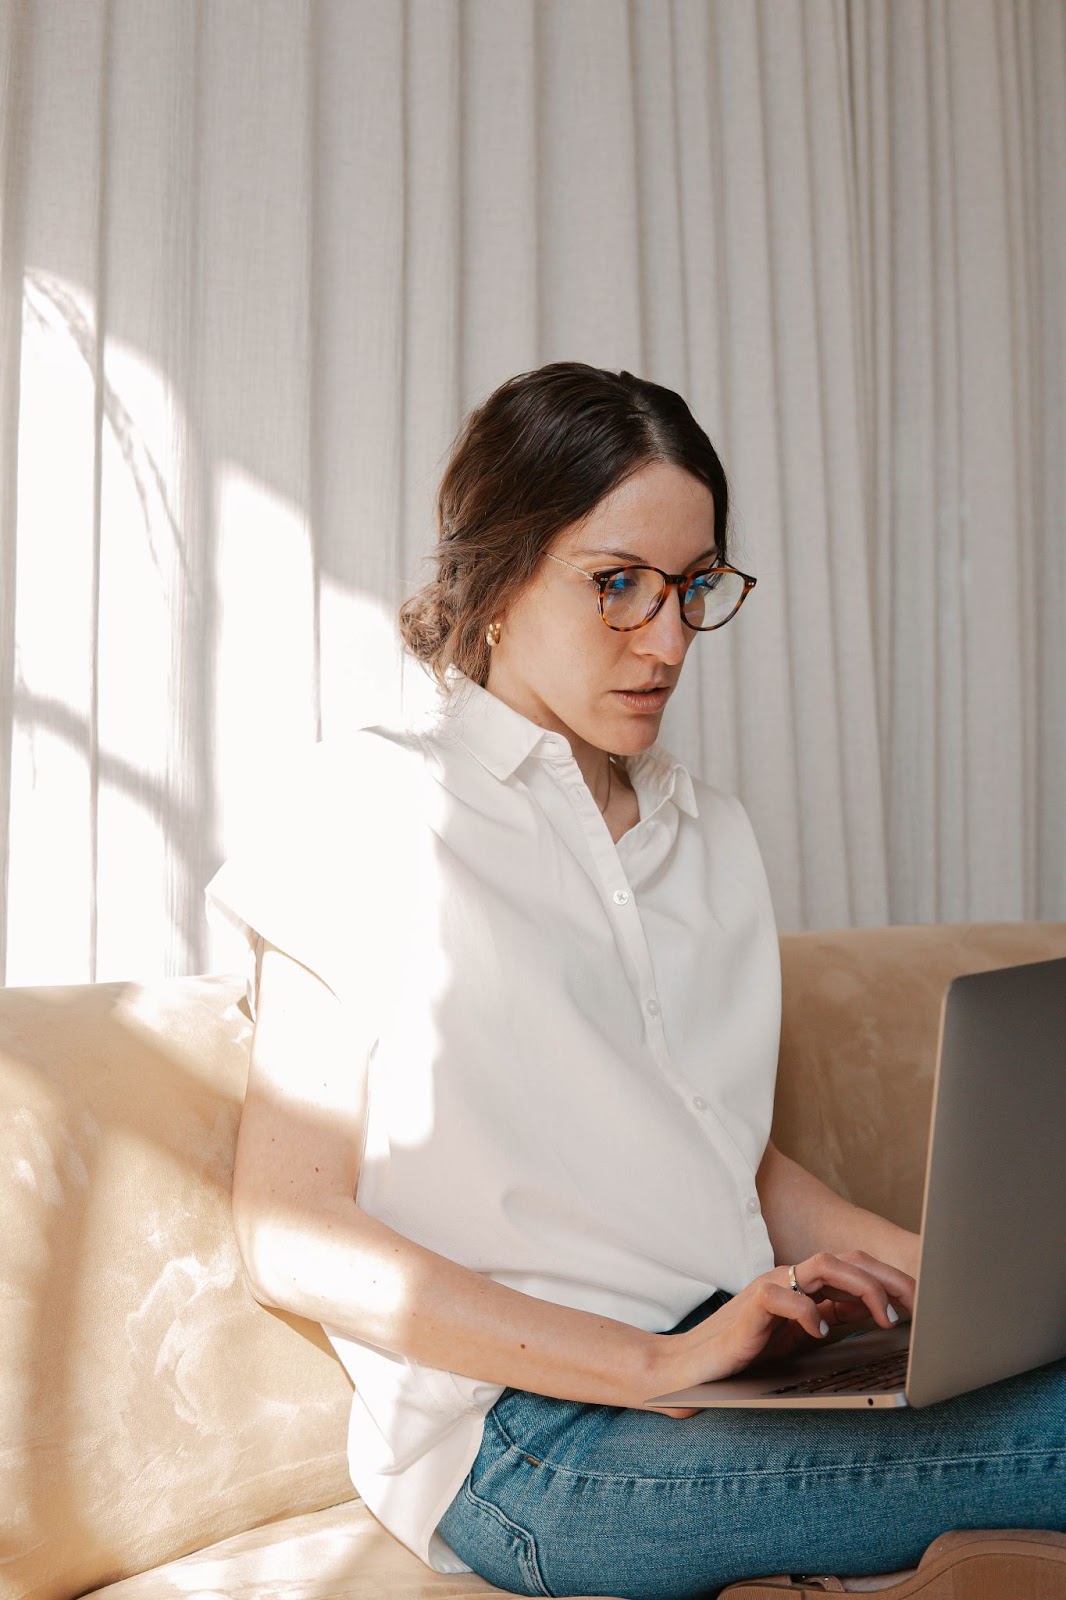 An image of a woman wearing glasses, sitting on a sofa, typing on a laptop computer.